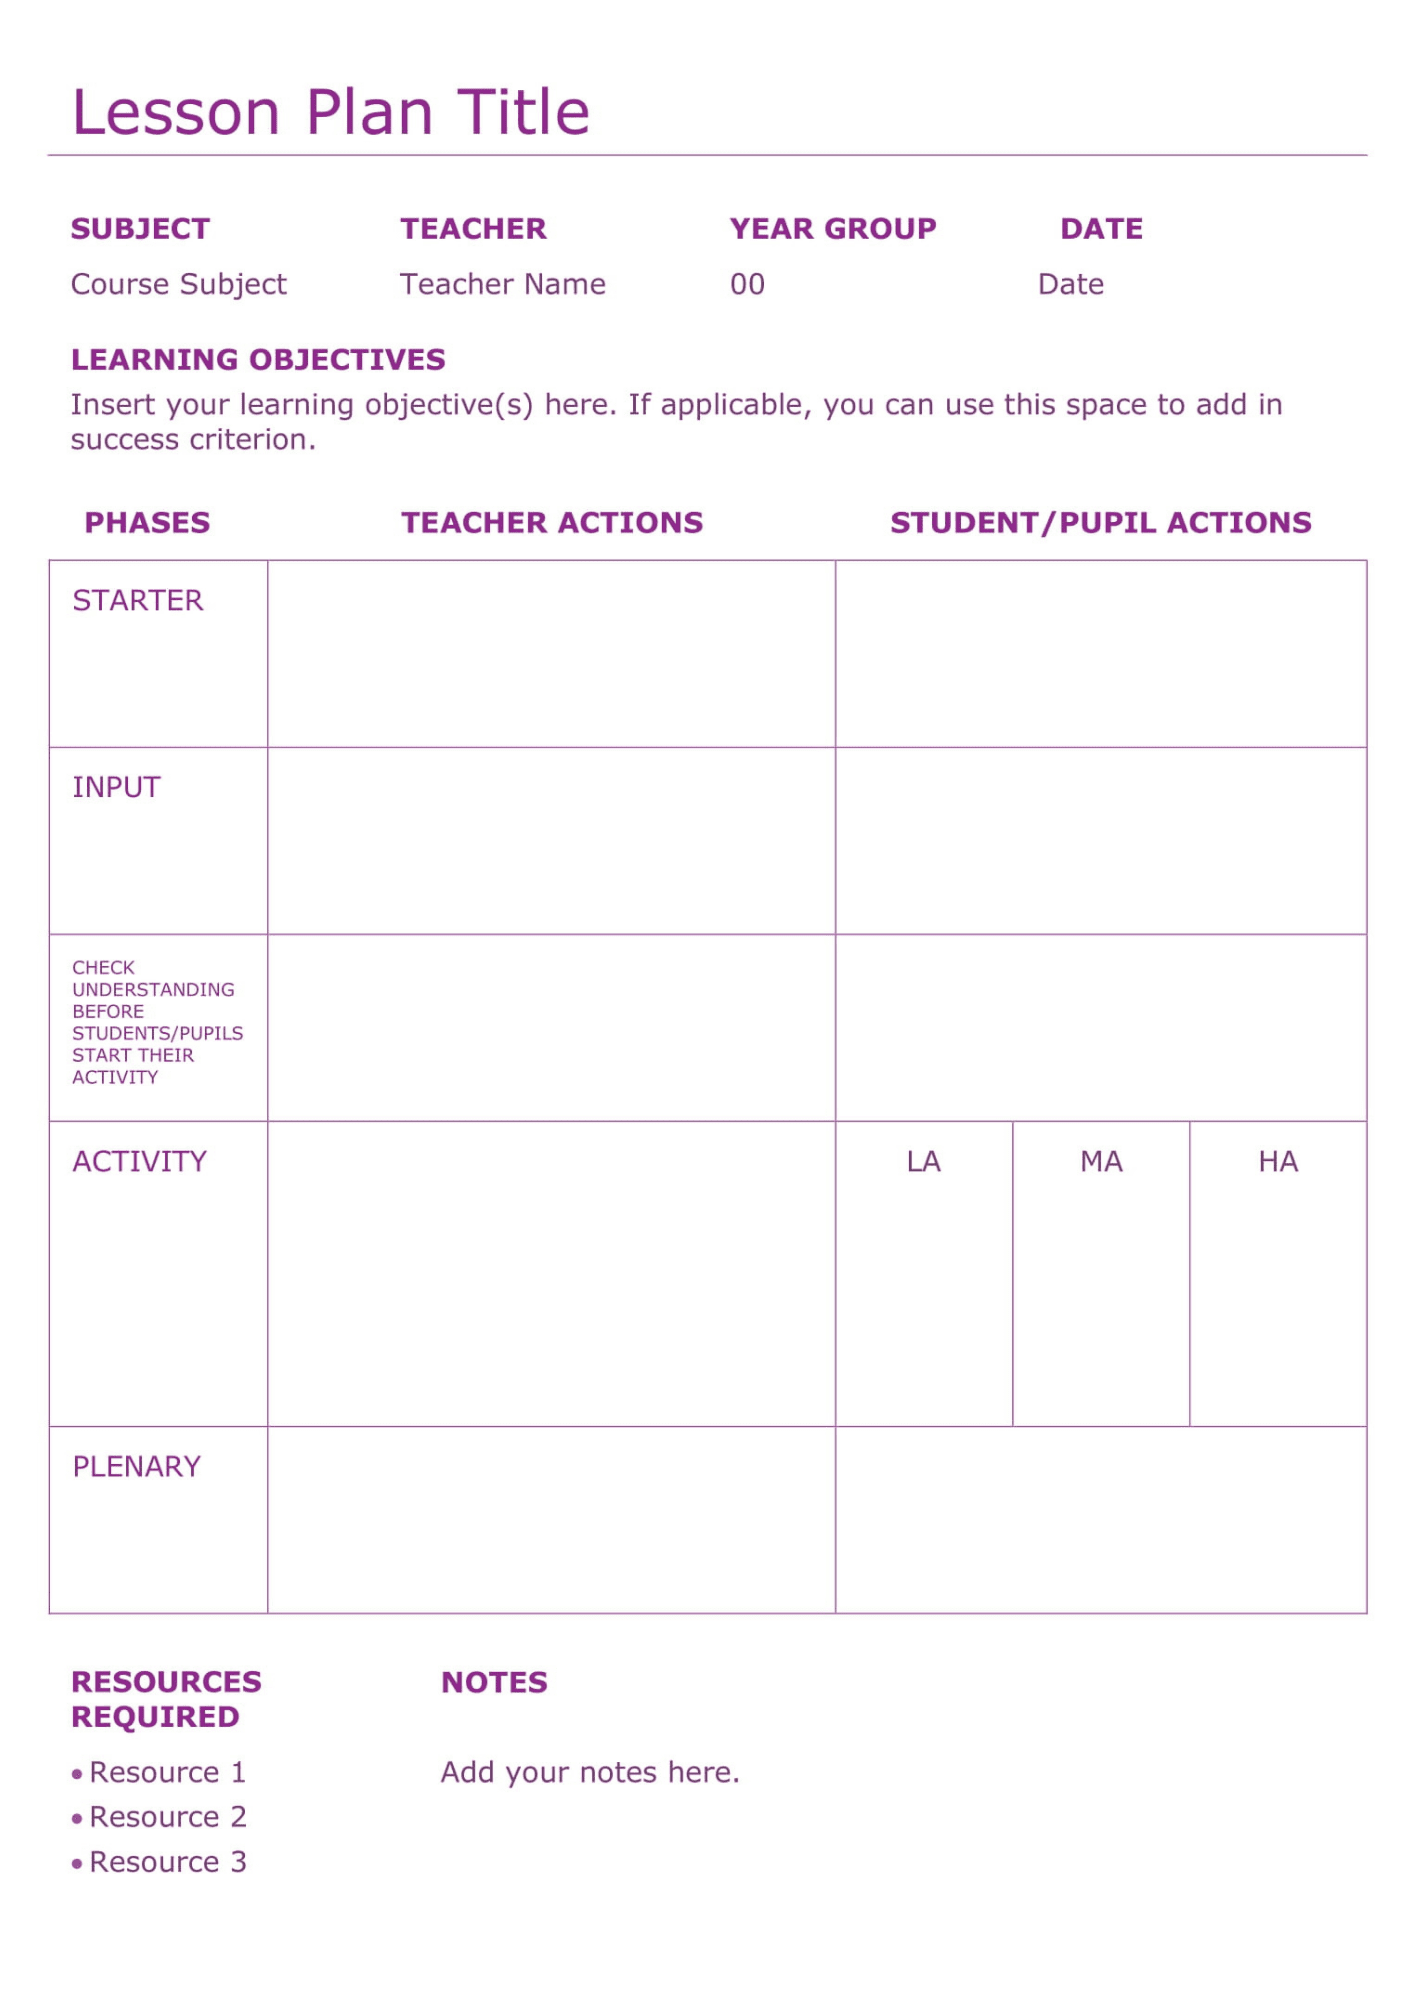 editable-lesson-plan-template-with-assessment-sheet-for-effective-teaching